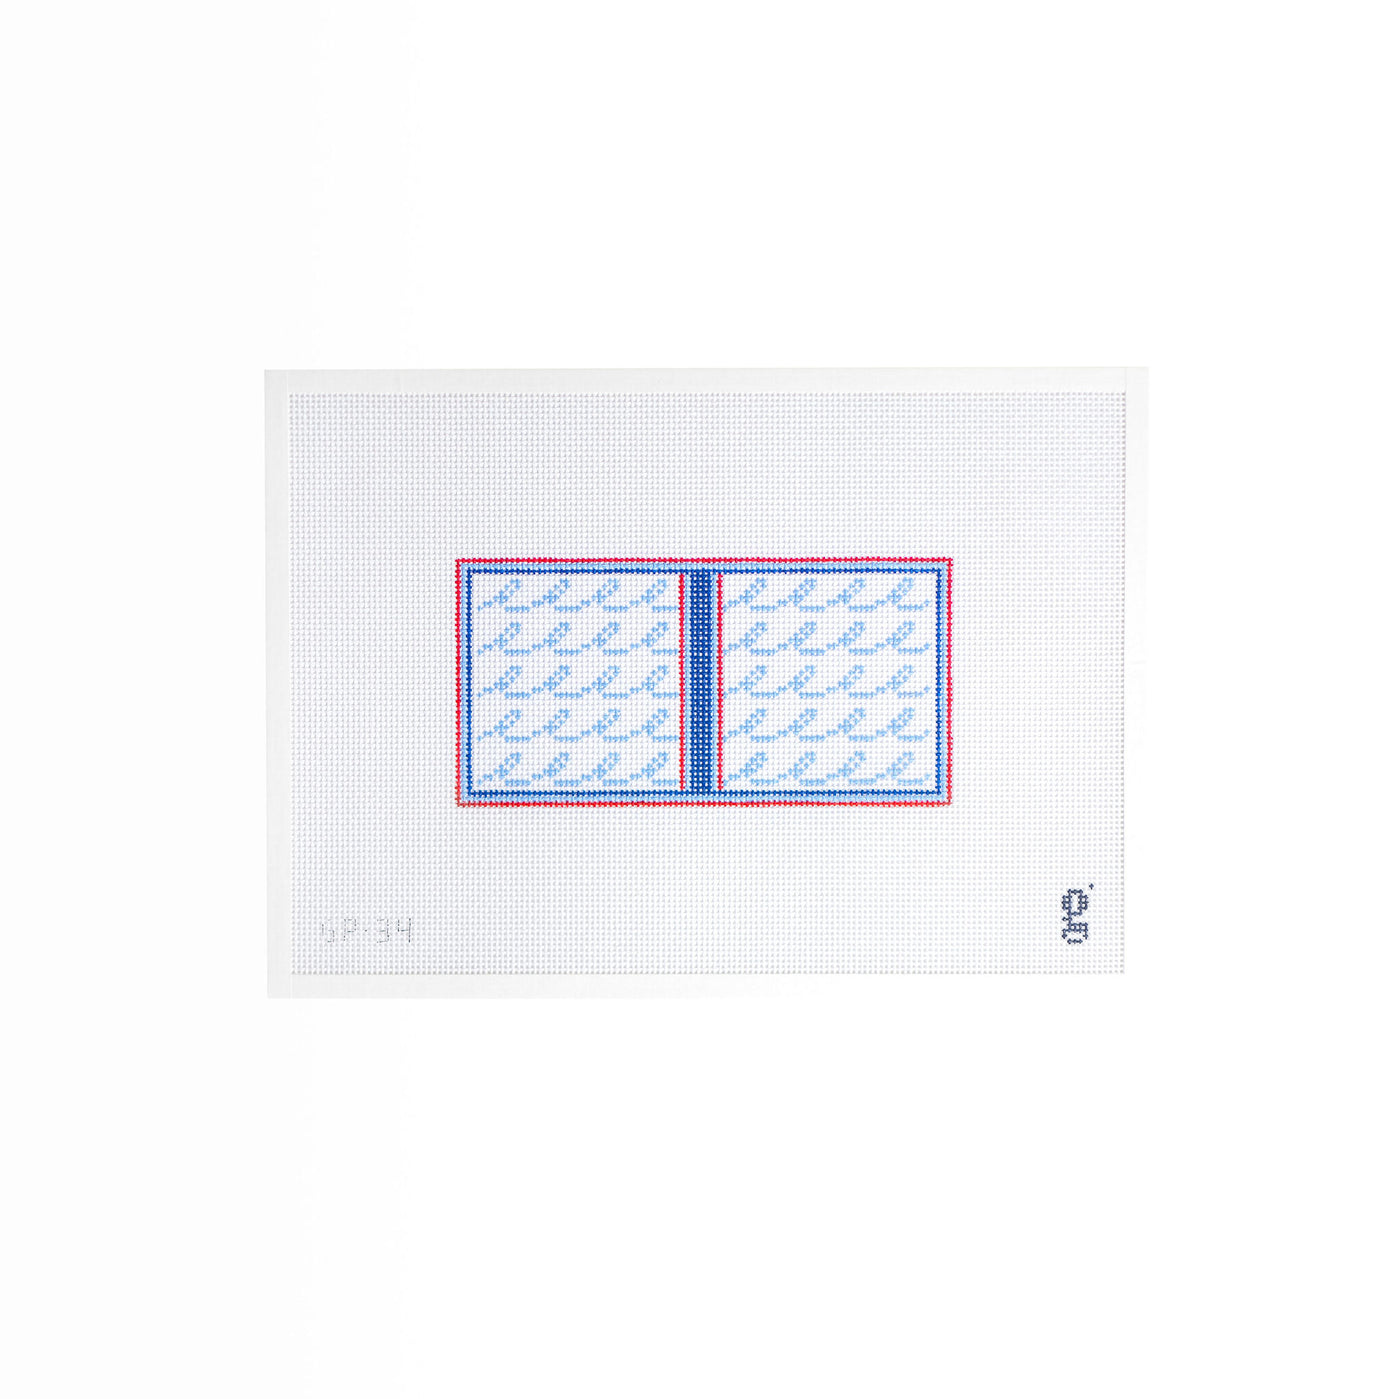 White rectangular needlepoint canvas. A red, light blue and navy striped border frame 5 rows of light blue squiggles. A navy vertical stripe divides the canvas in half. The goodpoint logo is at bottom right corner and the SKU is at bottom left corner.